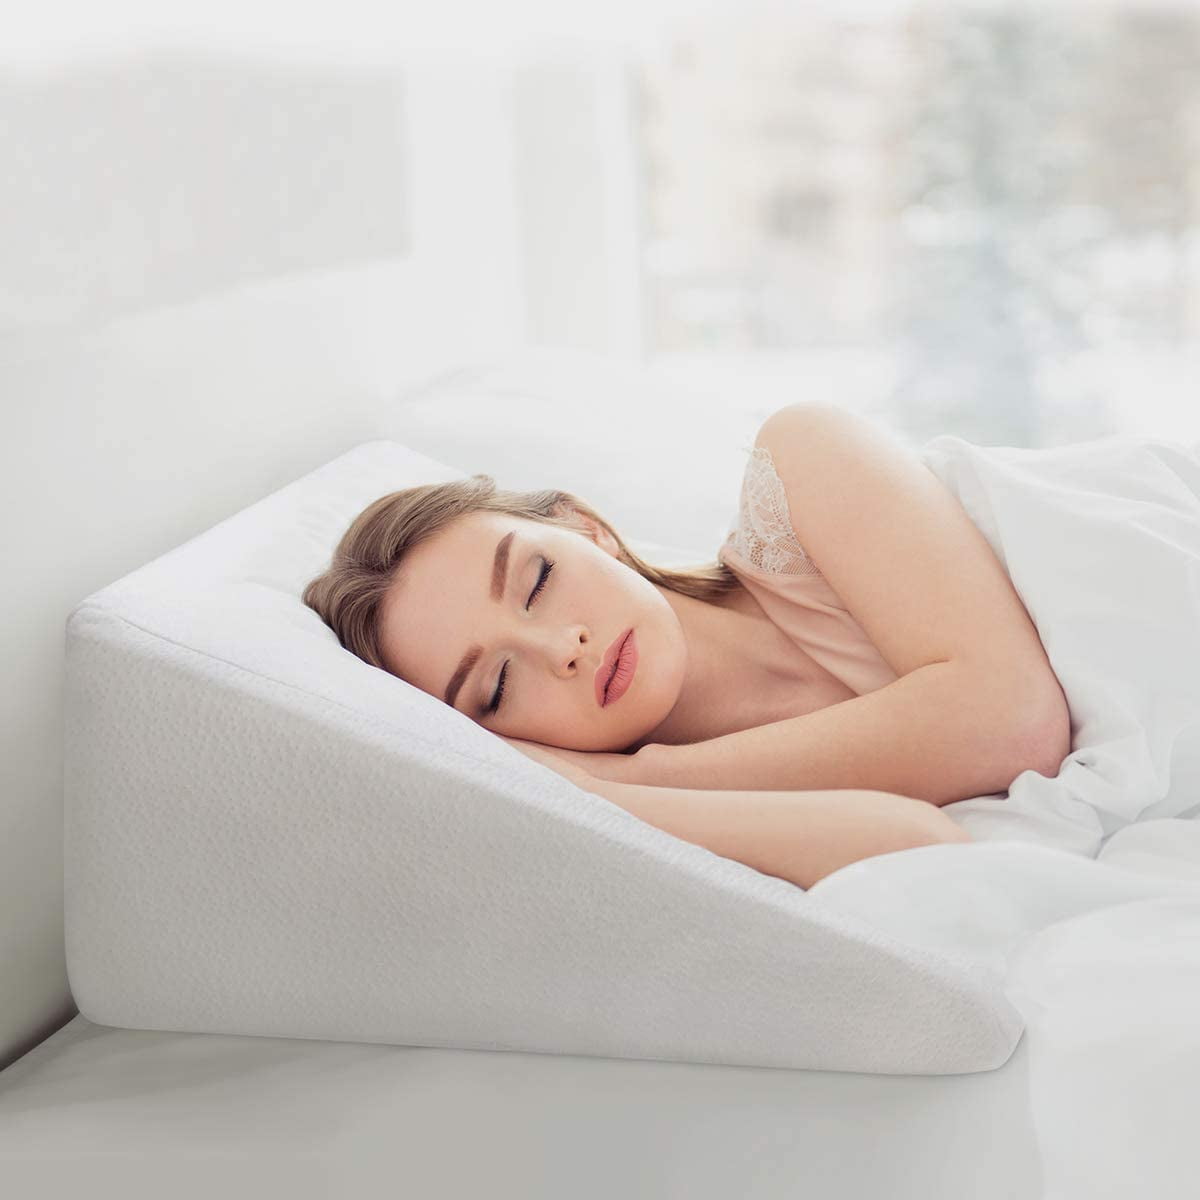 NEW Foam Bed Wedge Pillow for Mainstays Best Seller 